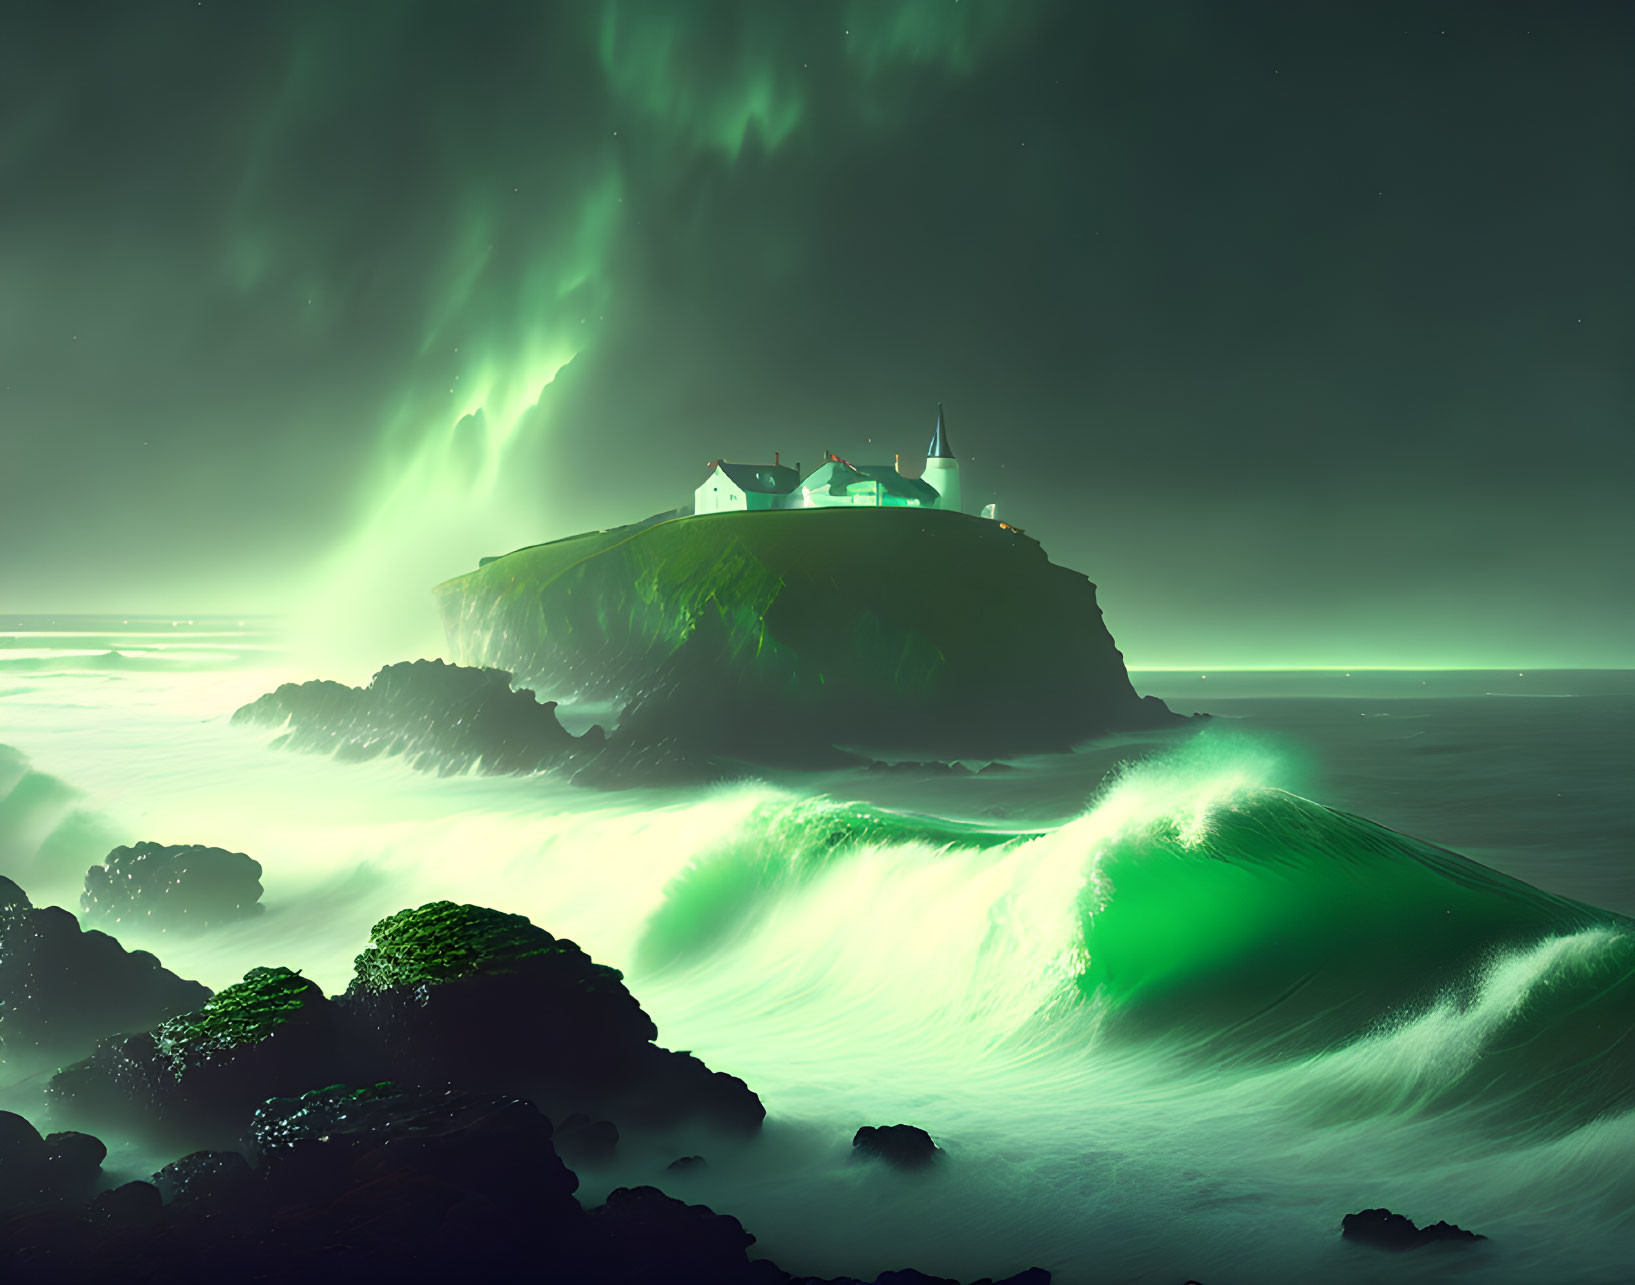 Mystic island under green aurora sky with roaring waves and lighthouse